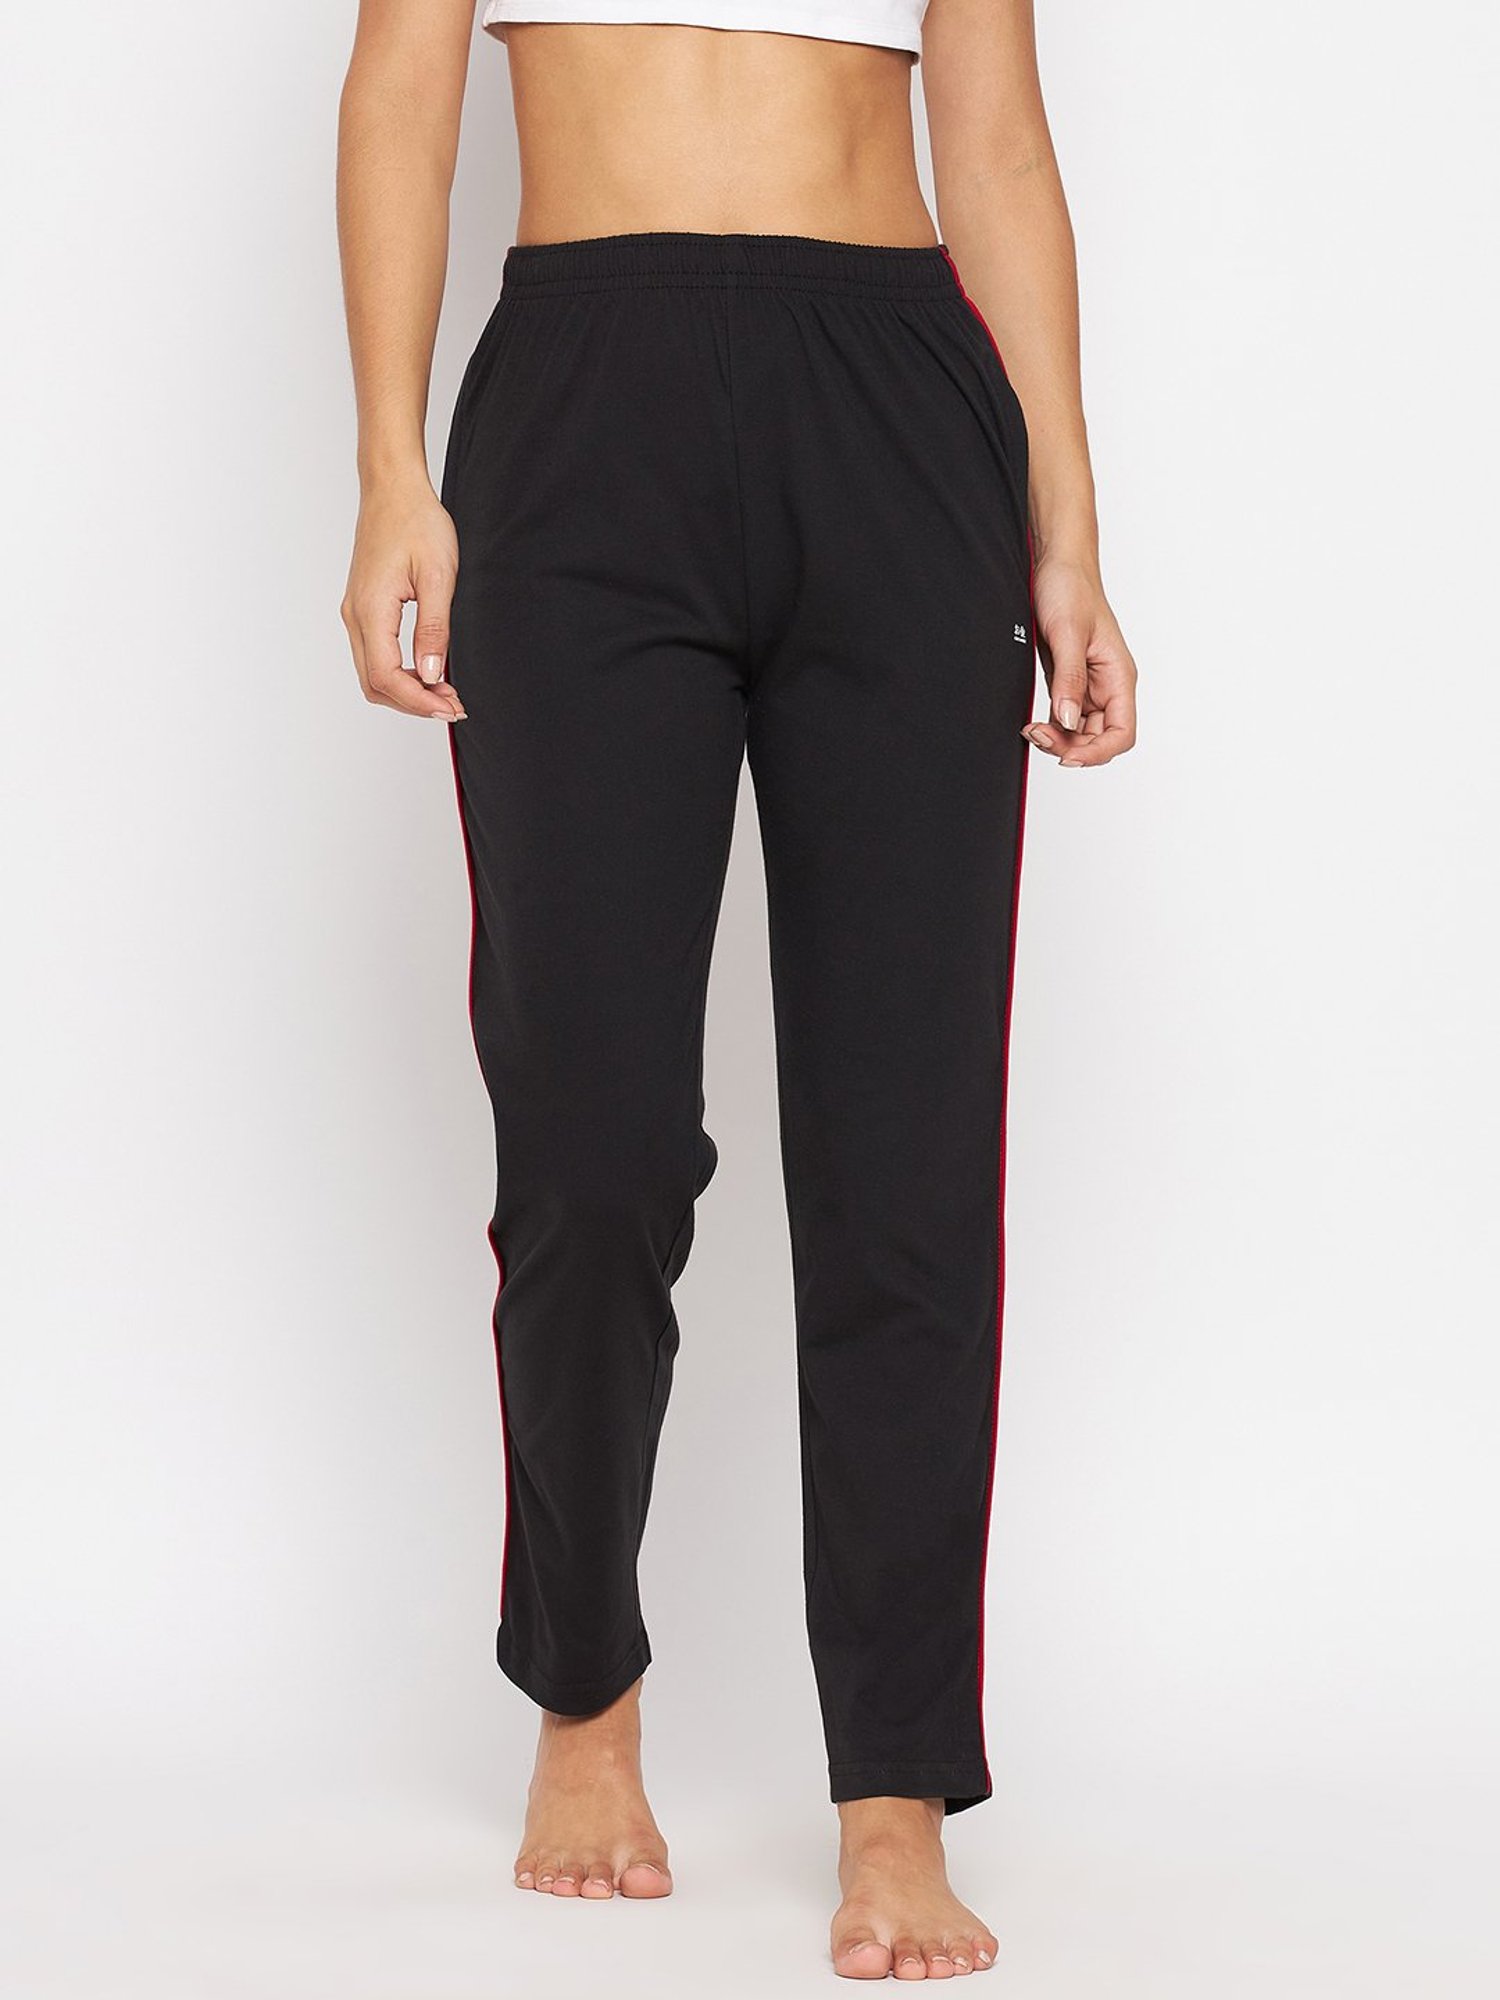 Buy Mens Black Checked Cotton Lounge Pants Online in India at Bewakoof